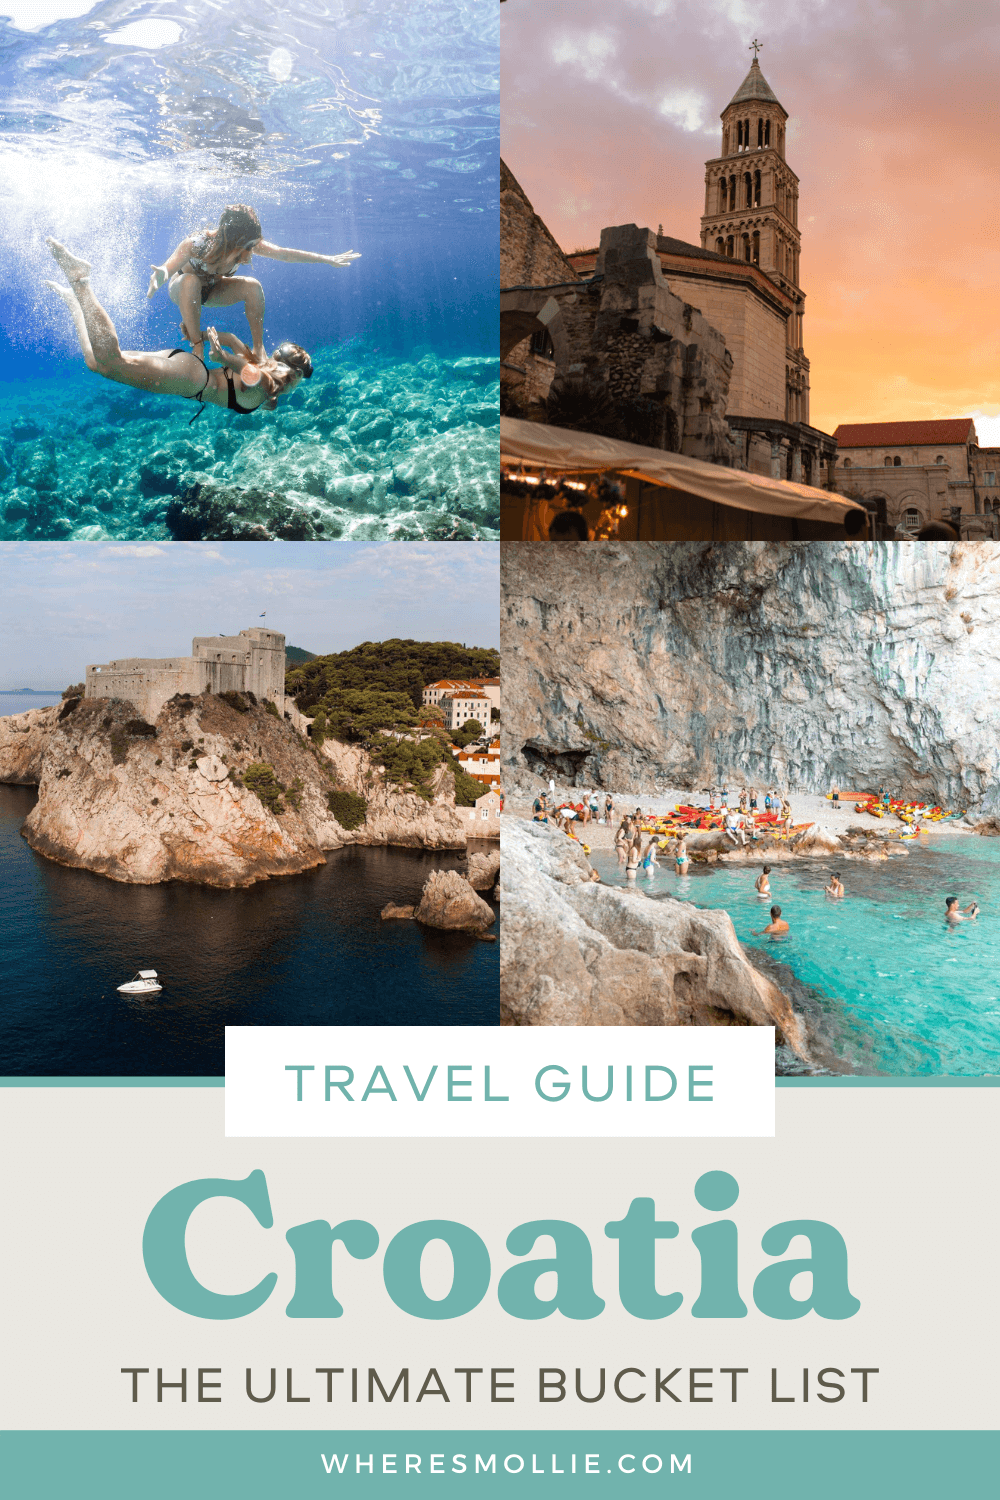 The best things to do in Croatia